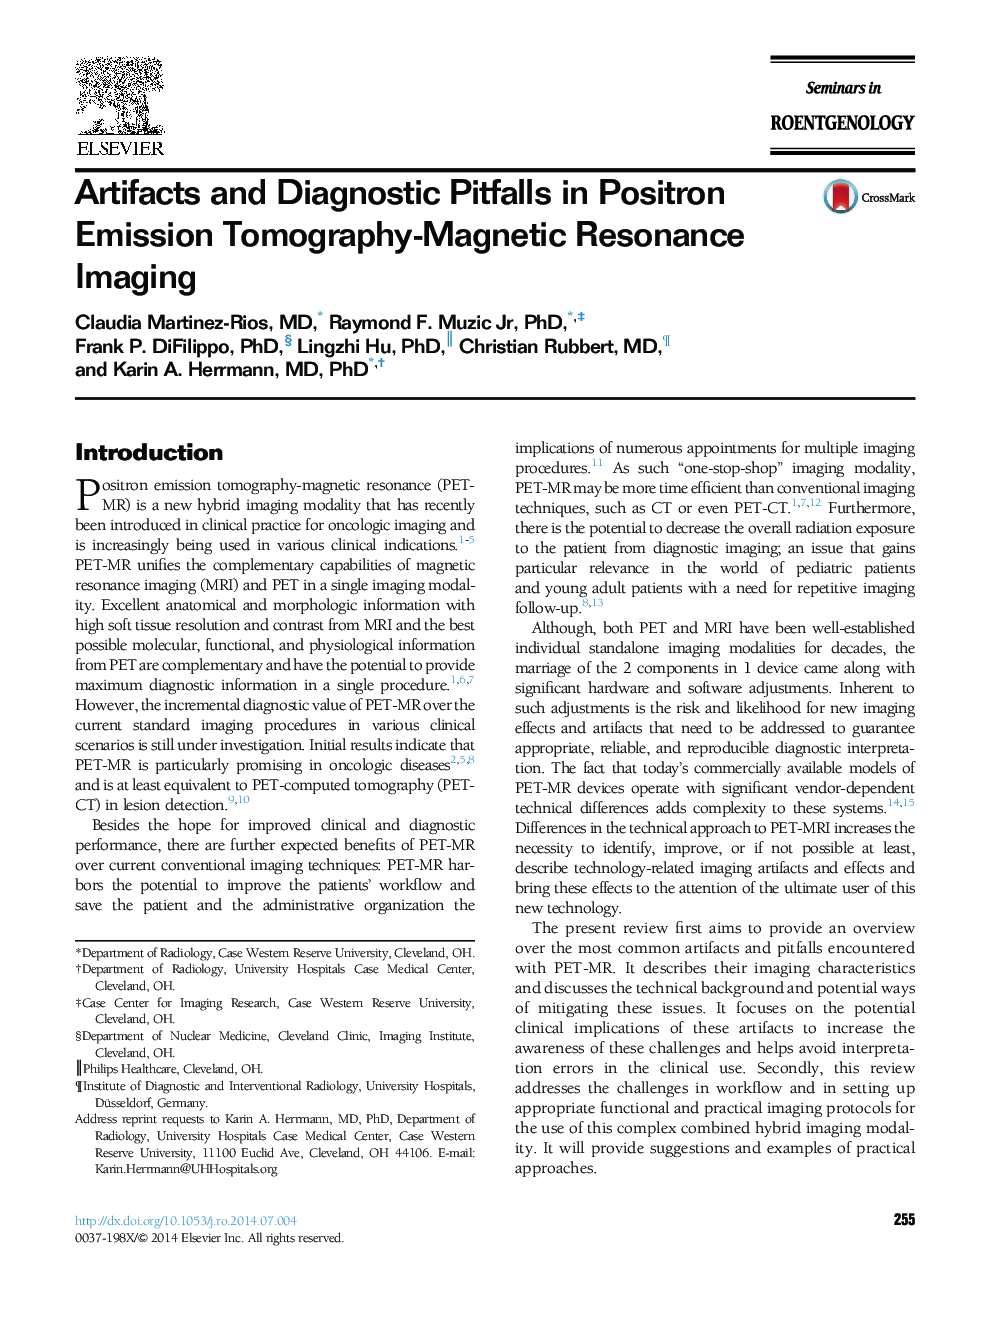 Artifacts and Diagnostic Pitfalls in Positron Emission Tomography-Magnetic Resonance Imaging